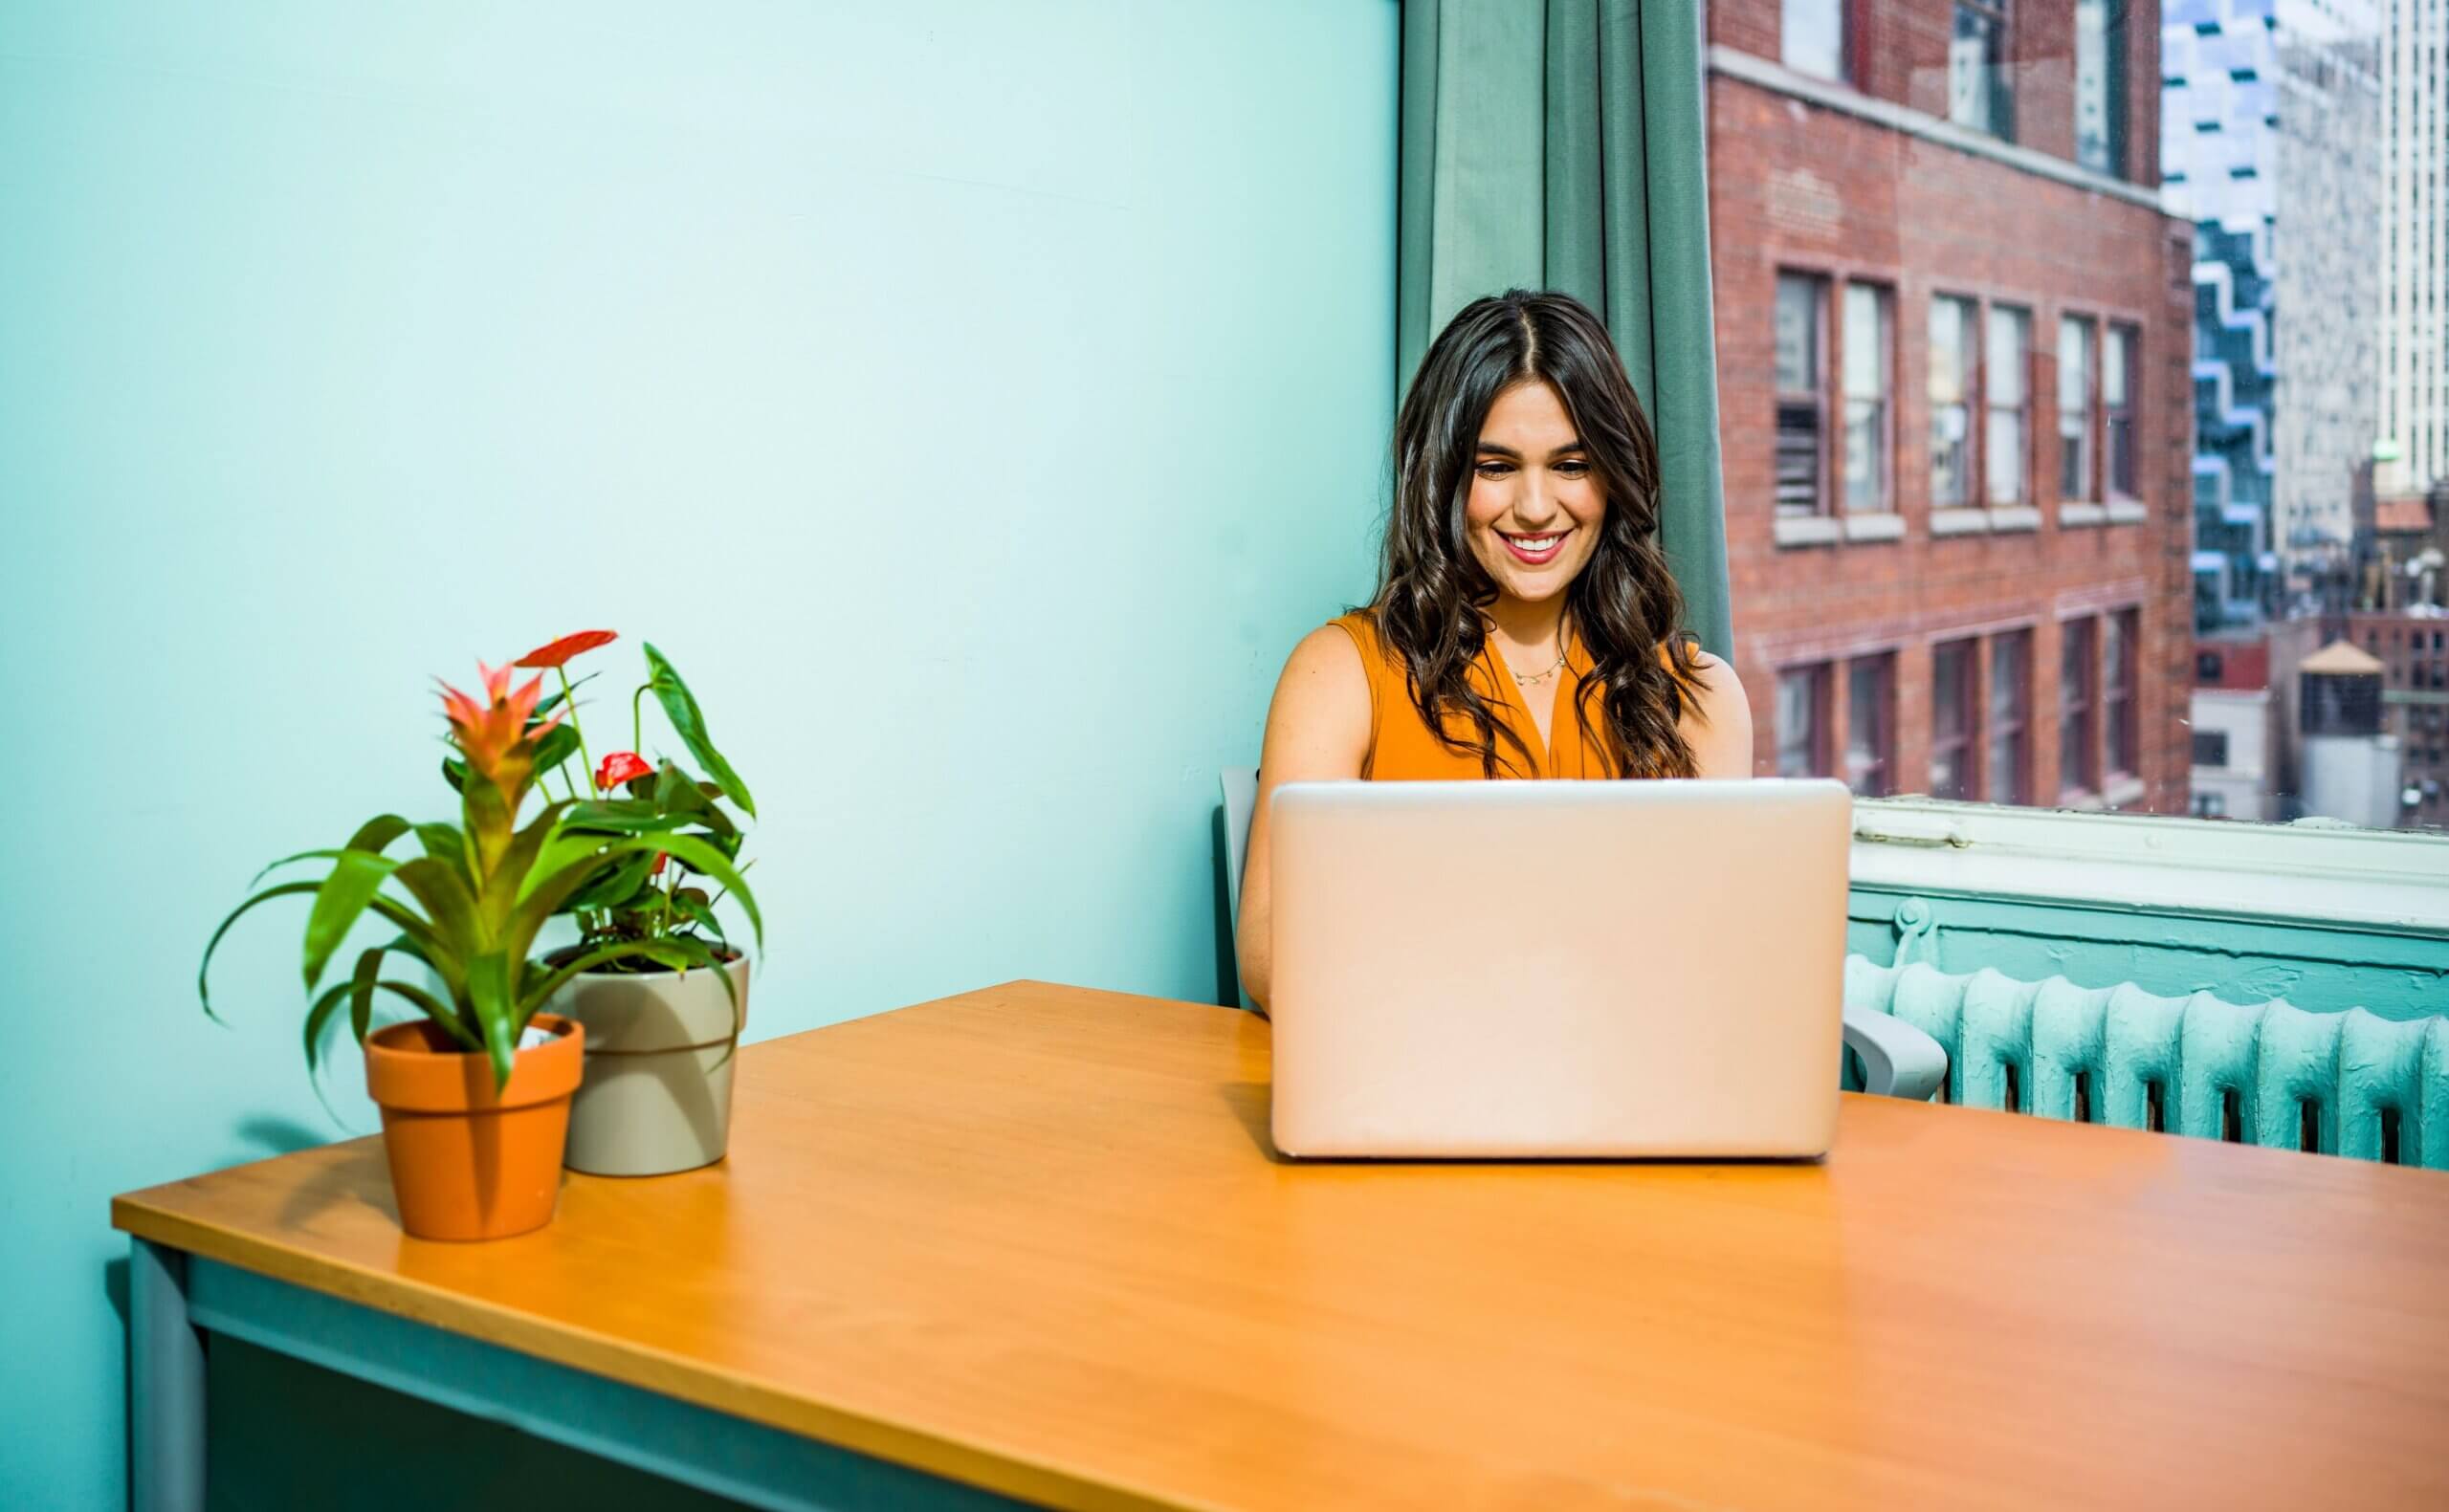 Woman smiling using laptop in colorful office space.